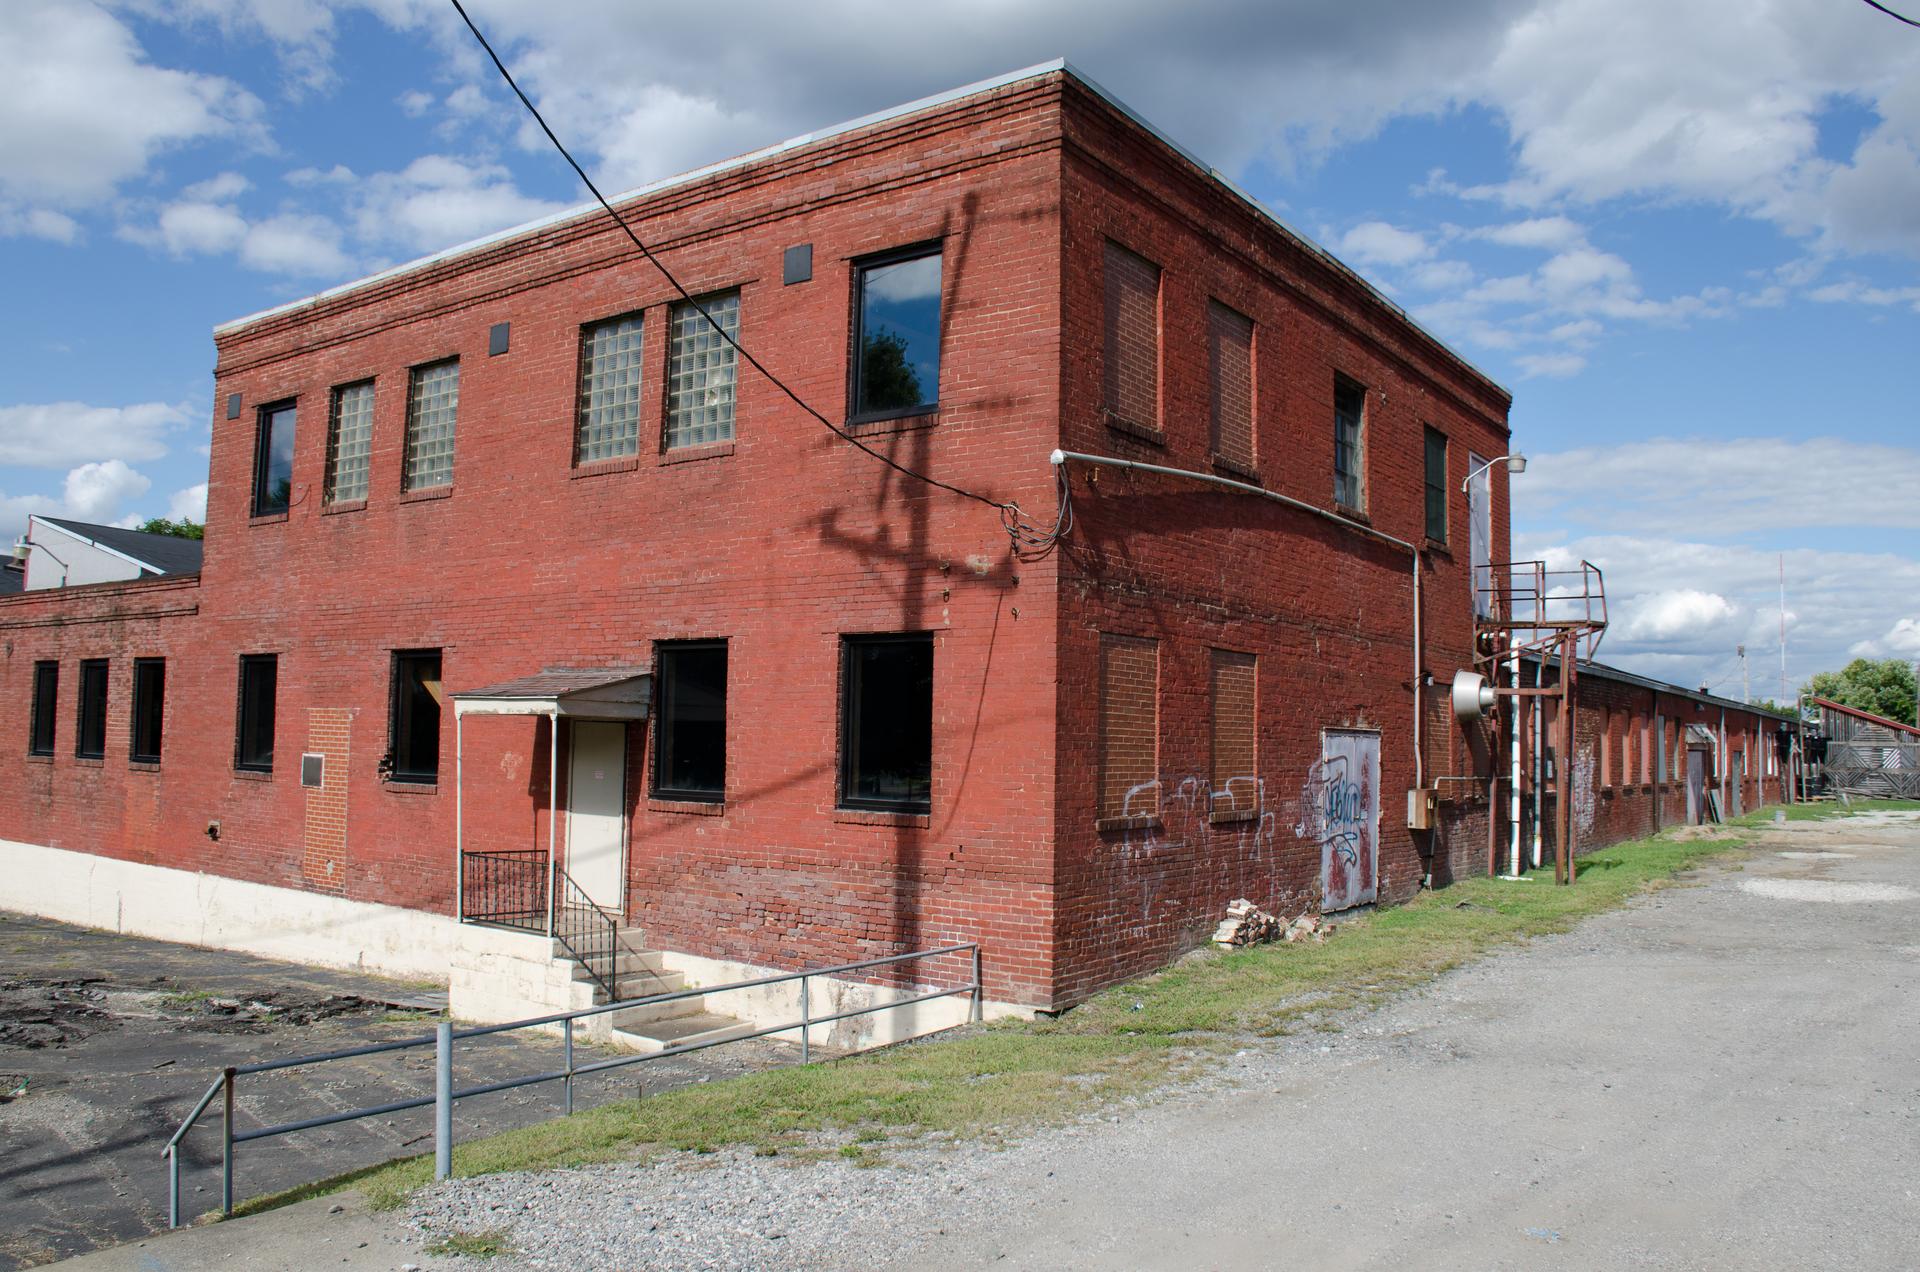 The Coalfield Development Corporation bought the old clothing manufacturing factory in Huntington, West Virginia for $1 per square foot.